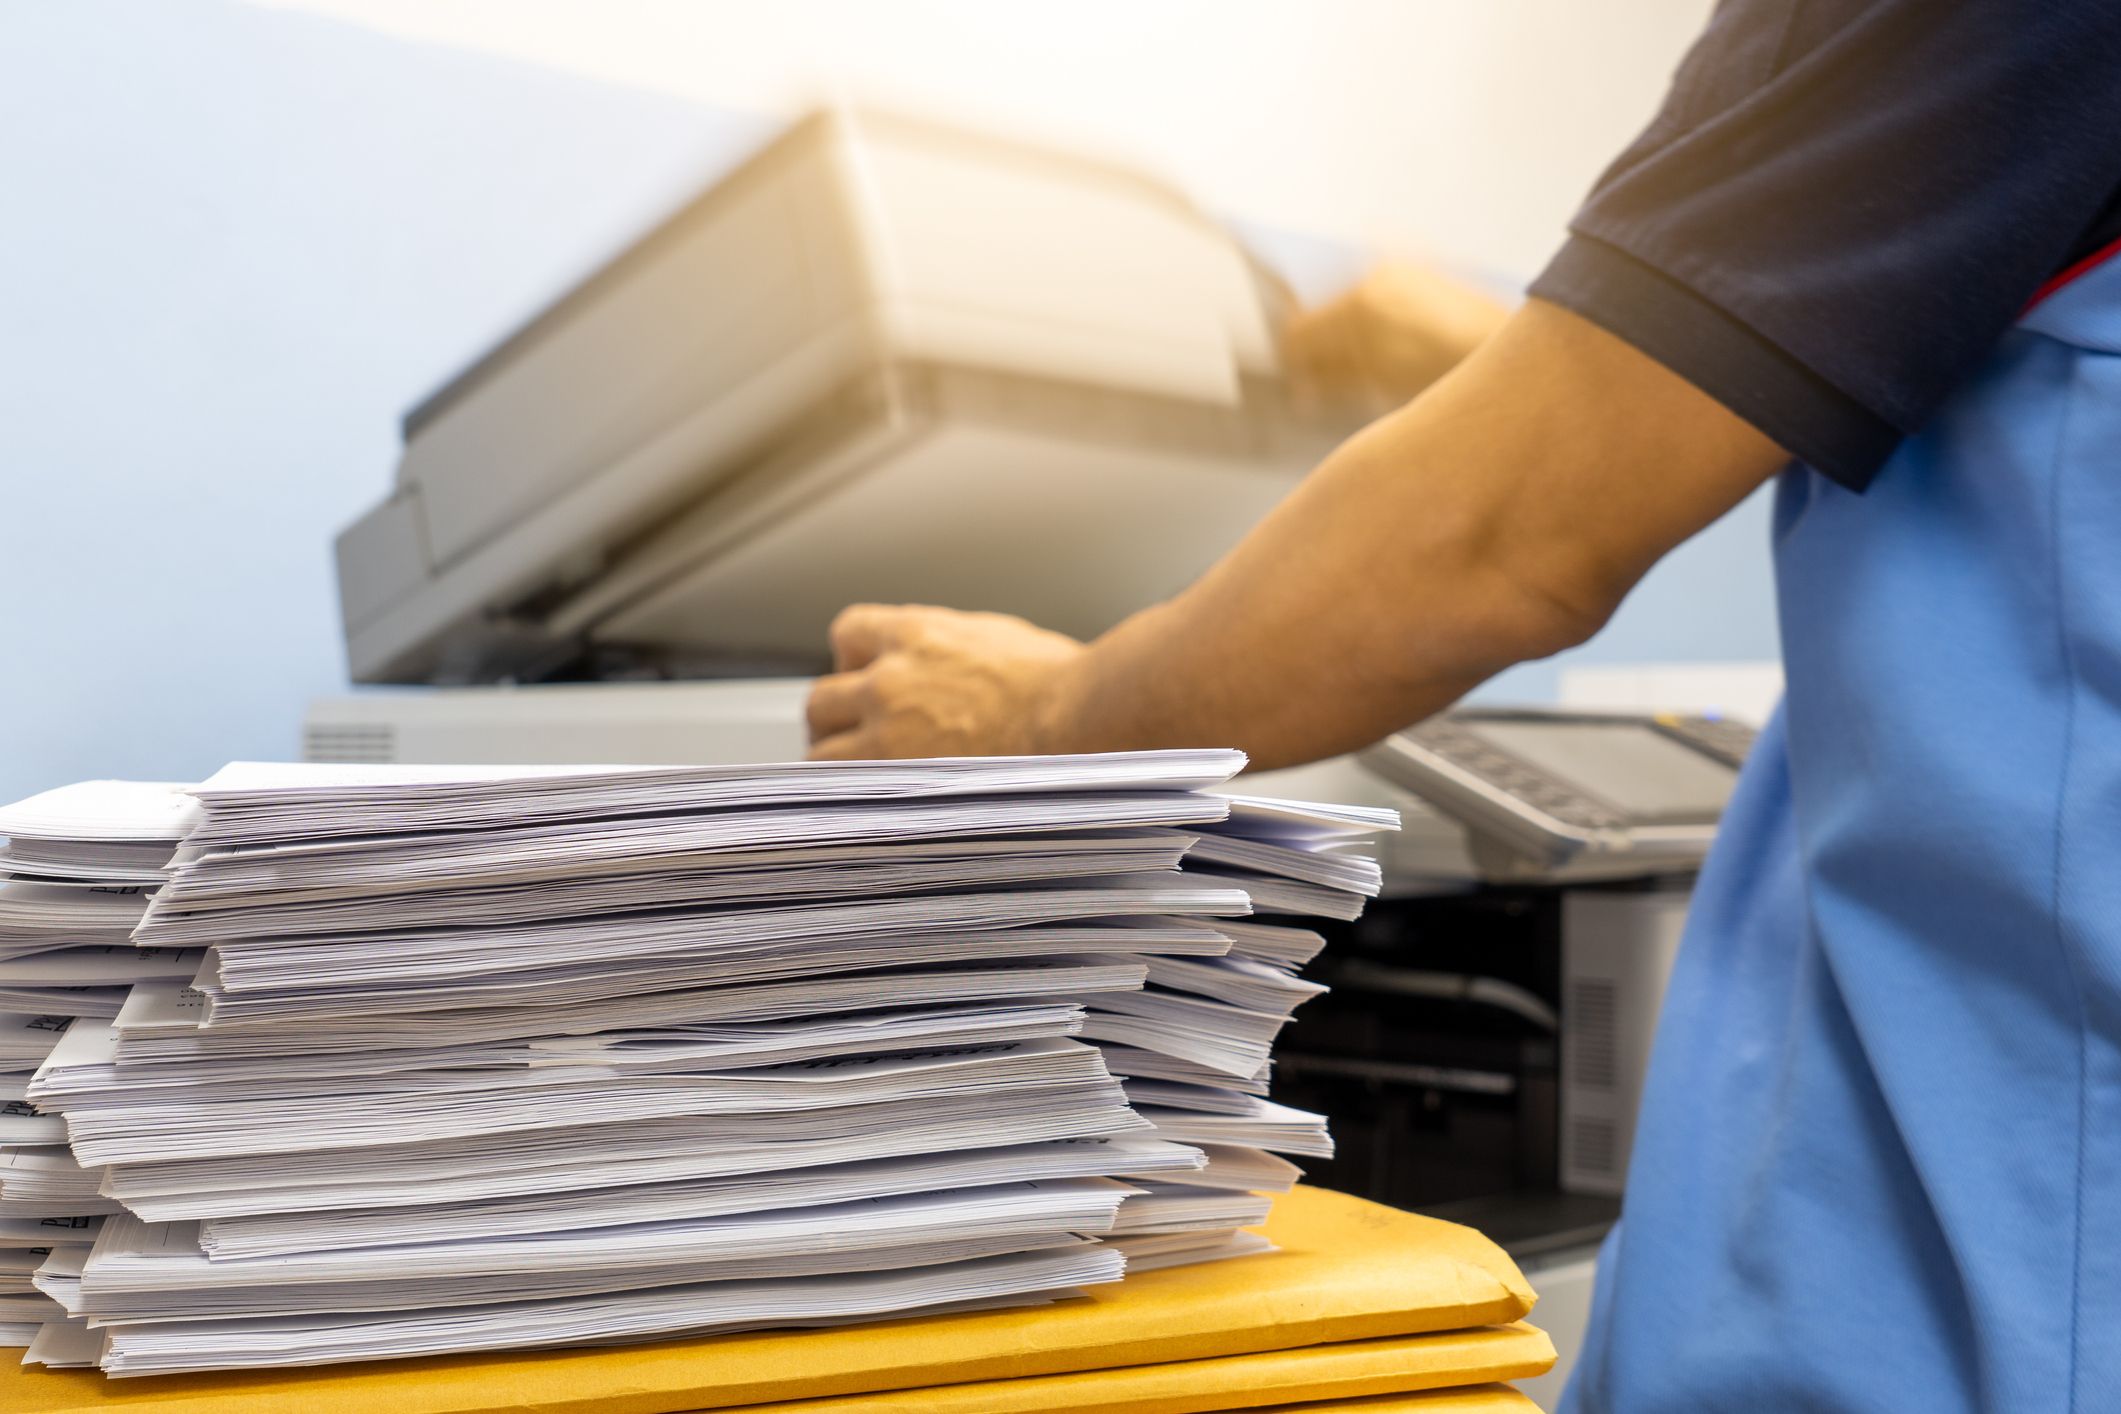 The papers stacked waiting to be copied with a copier machine.